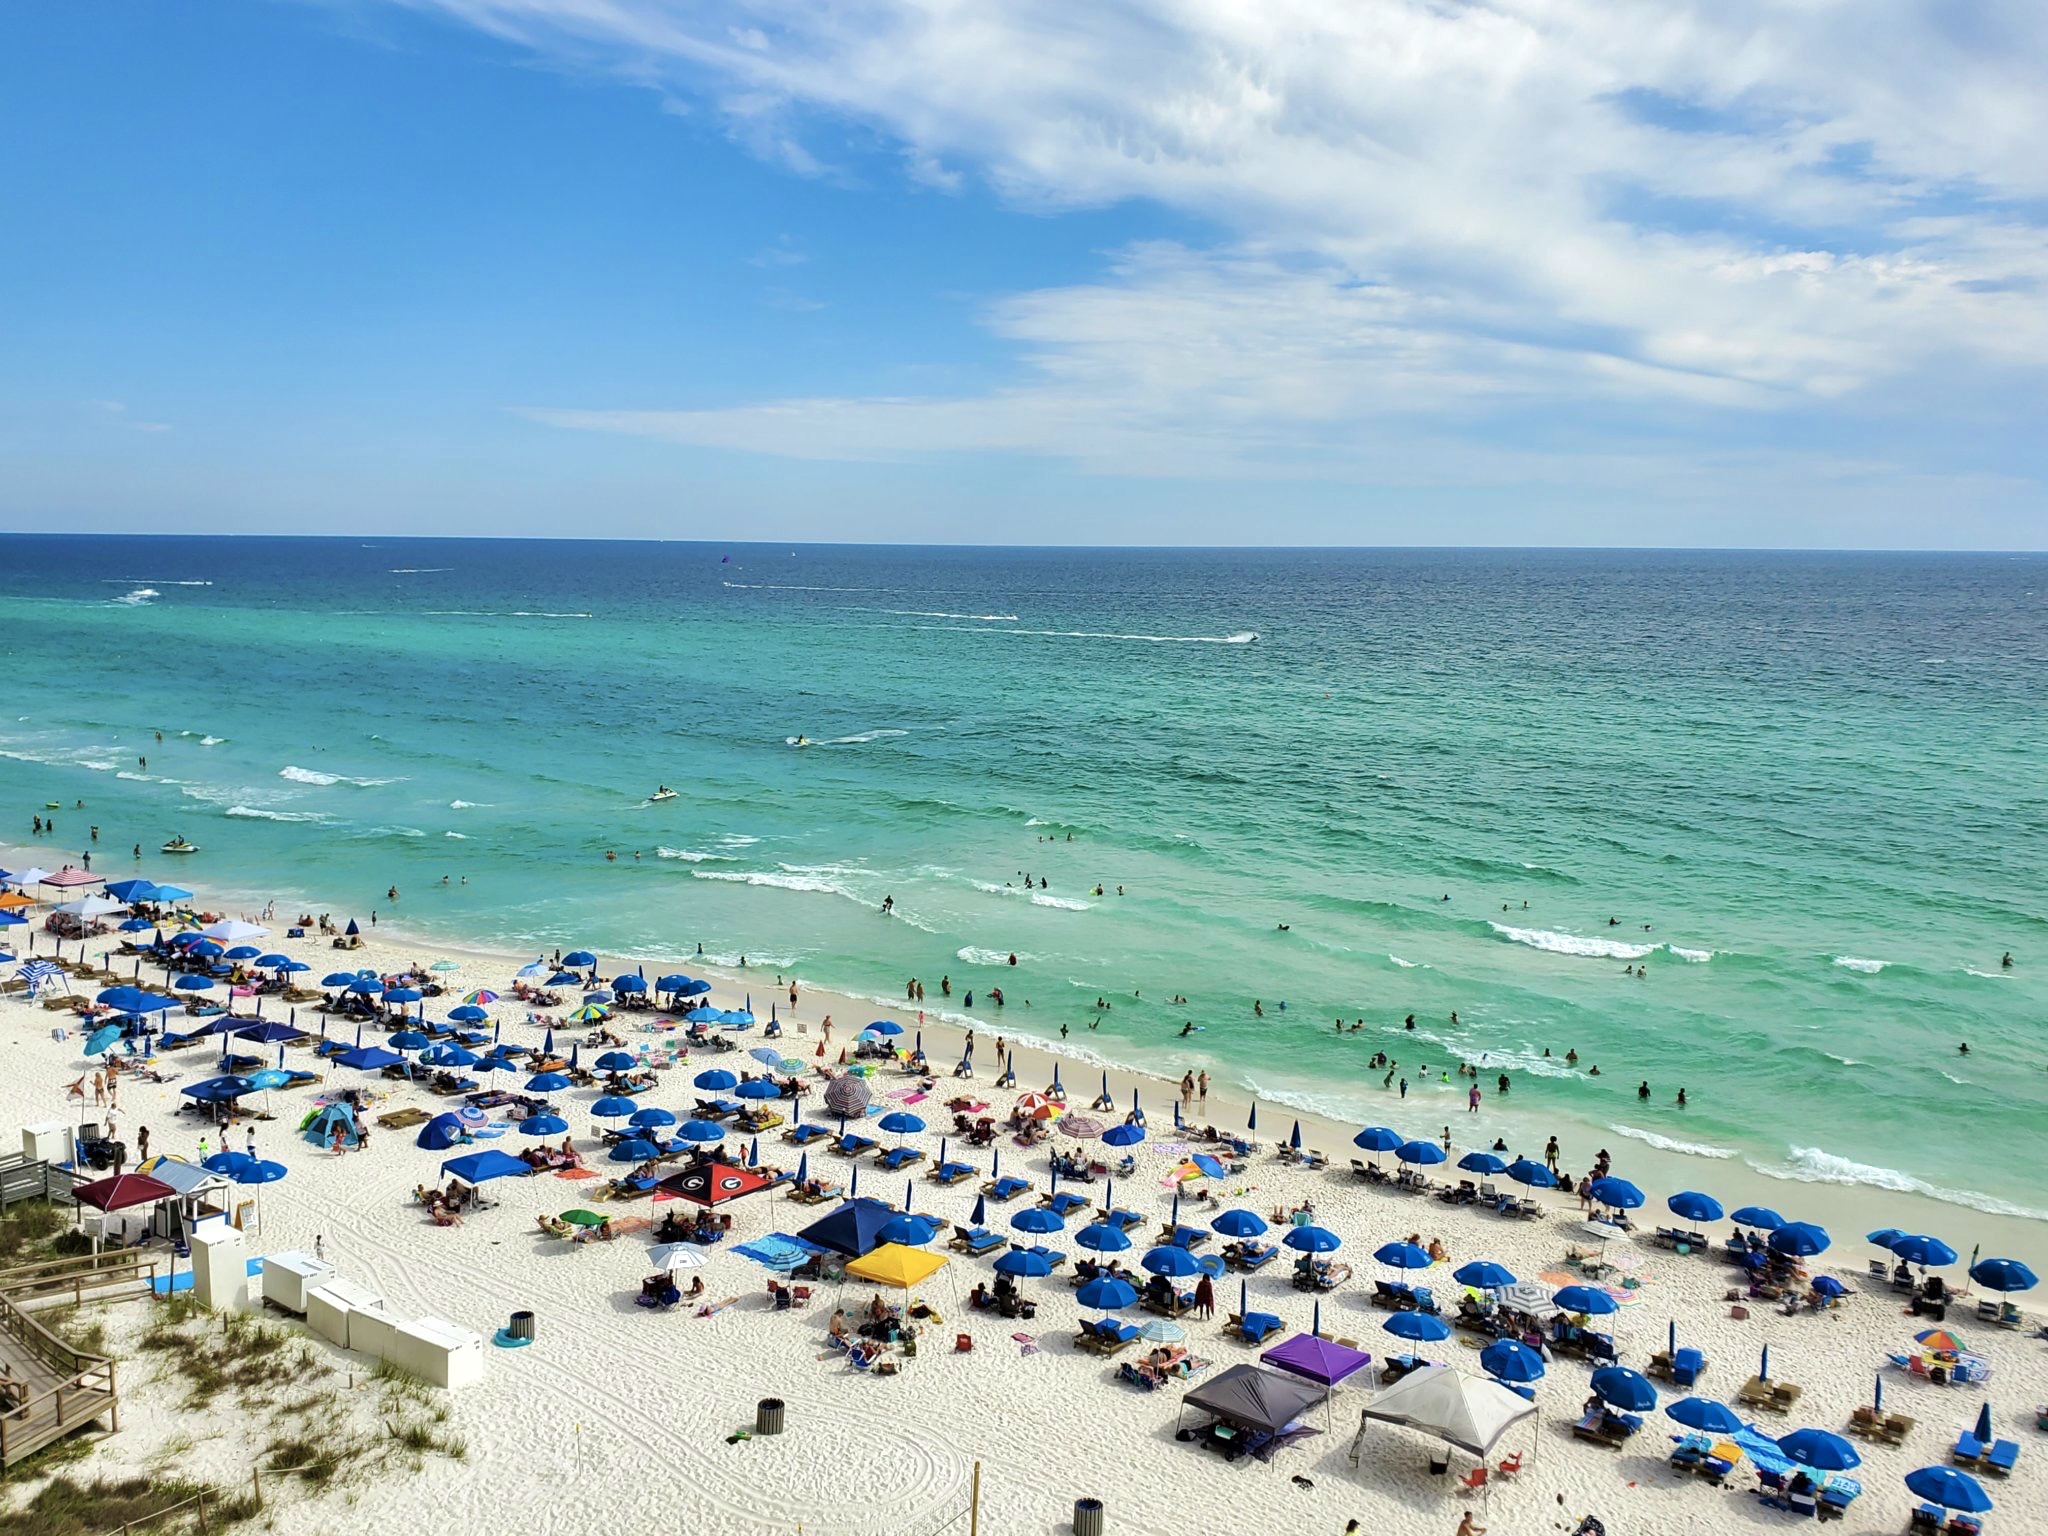 My Trip to Panama City Beach – Sit Down and Chat